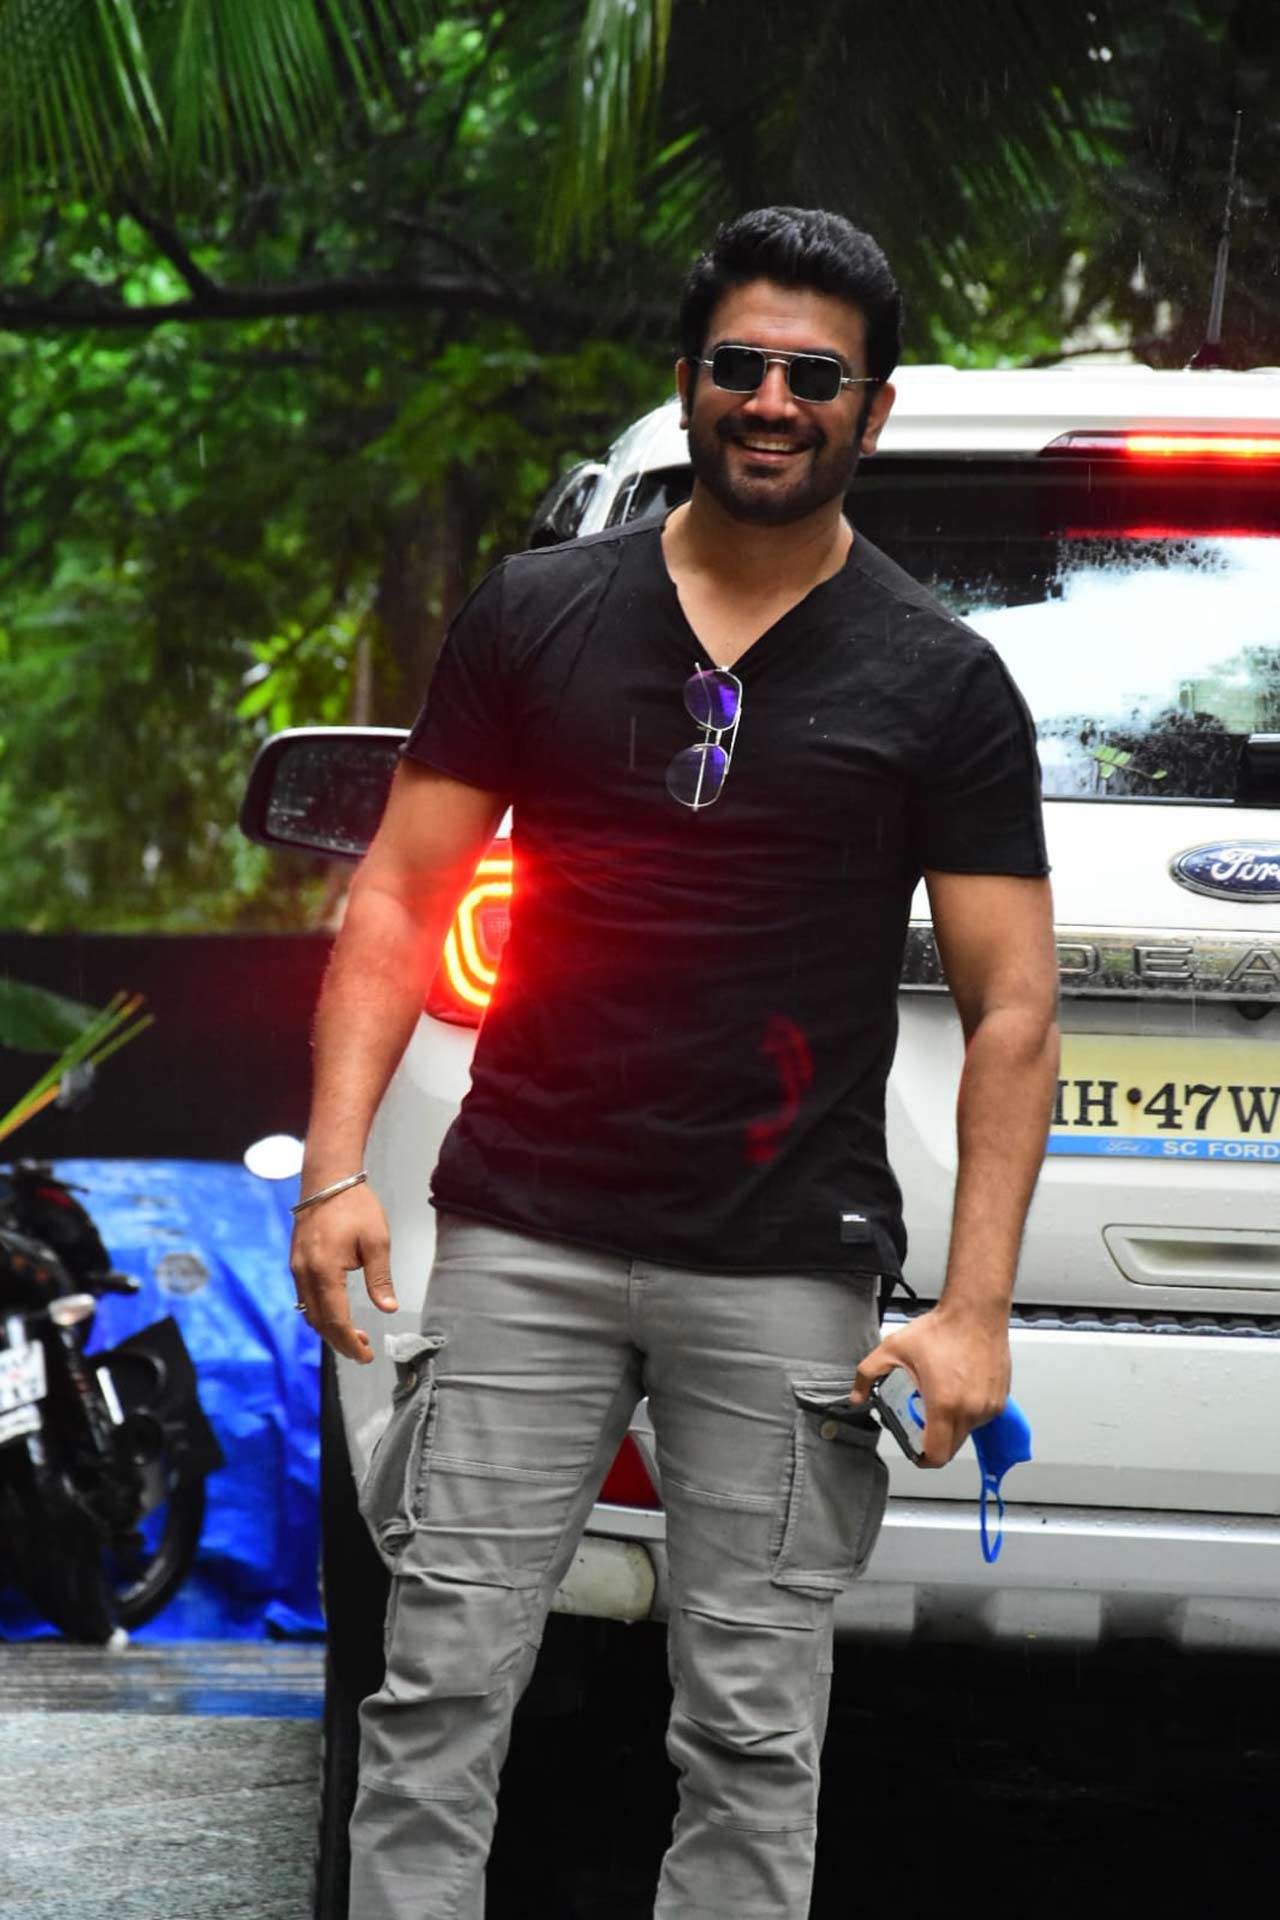 Sharad Kelkar was also snapped in Bandra. The actor has 'Bhuj: The Pride of India' and 'Jersey' as his upcoming Bollywood projects.